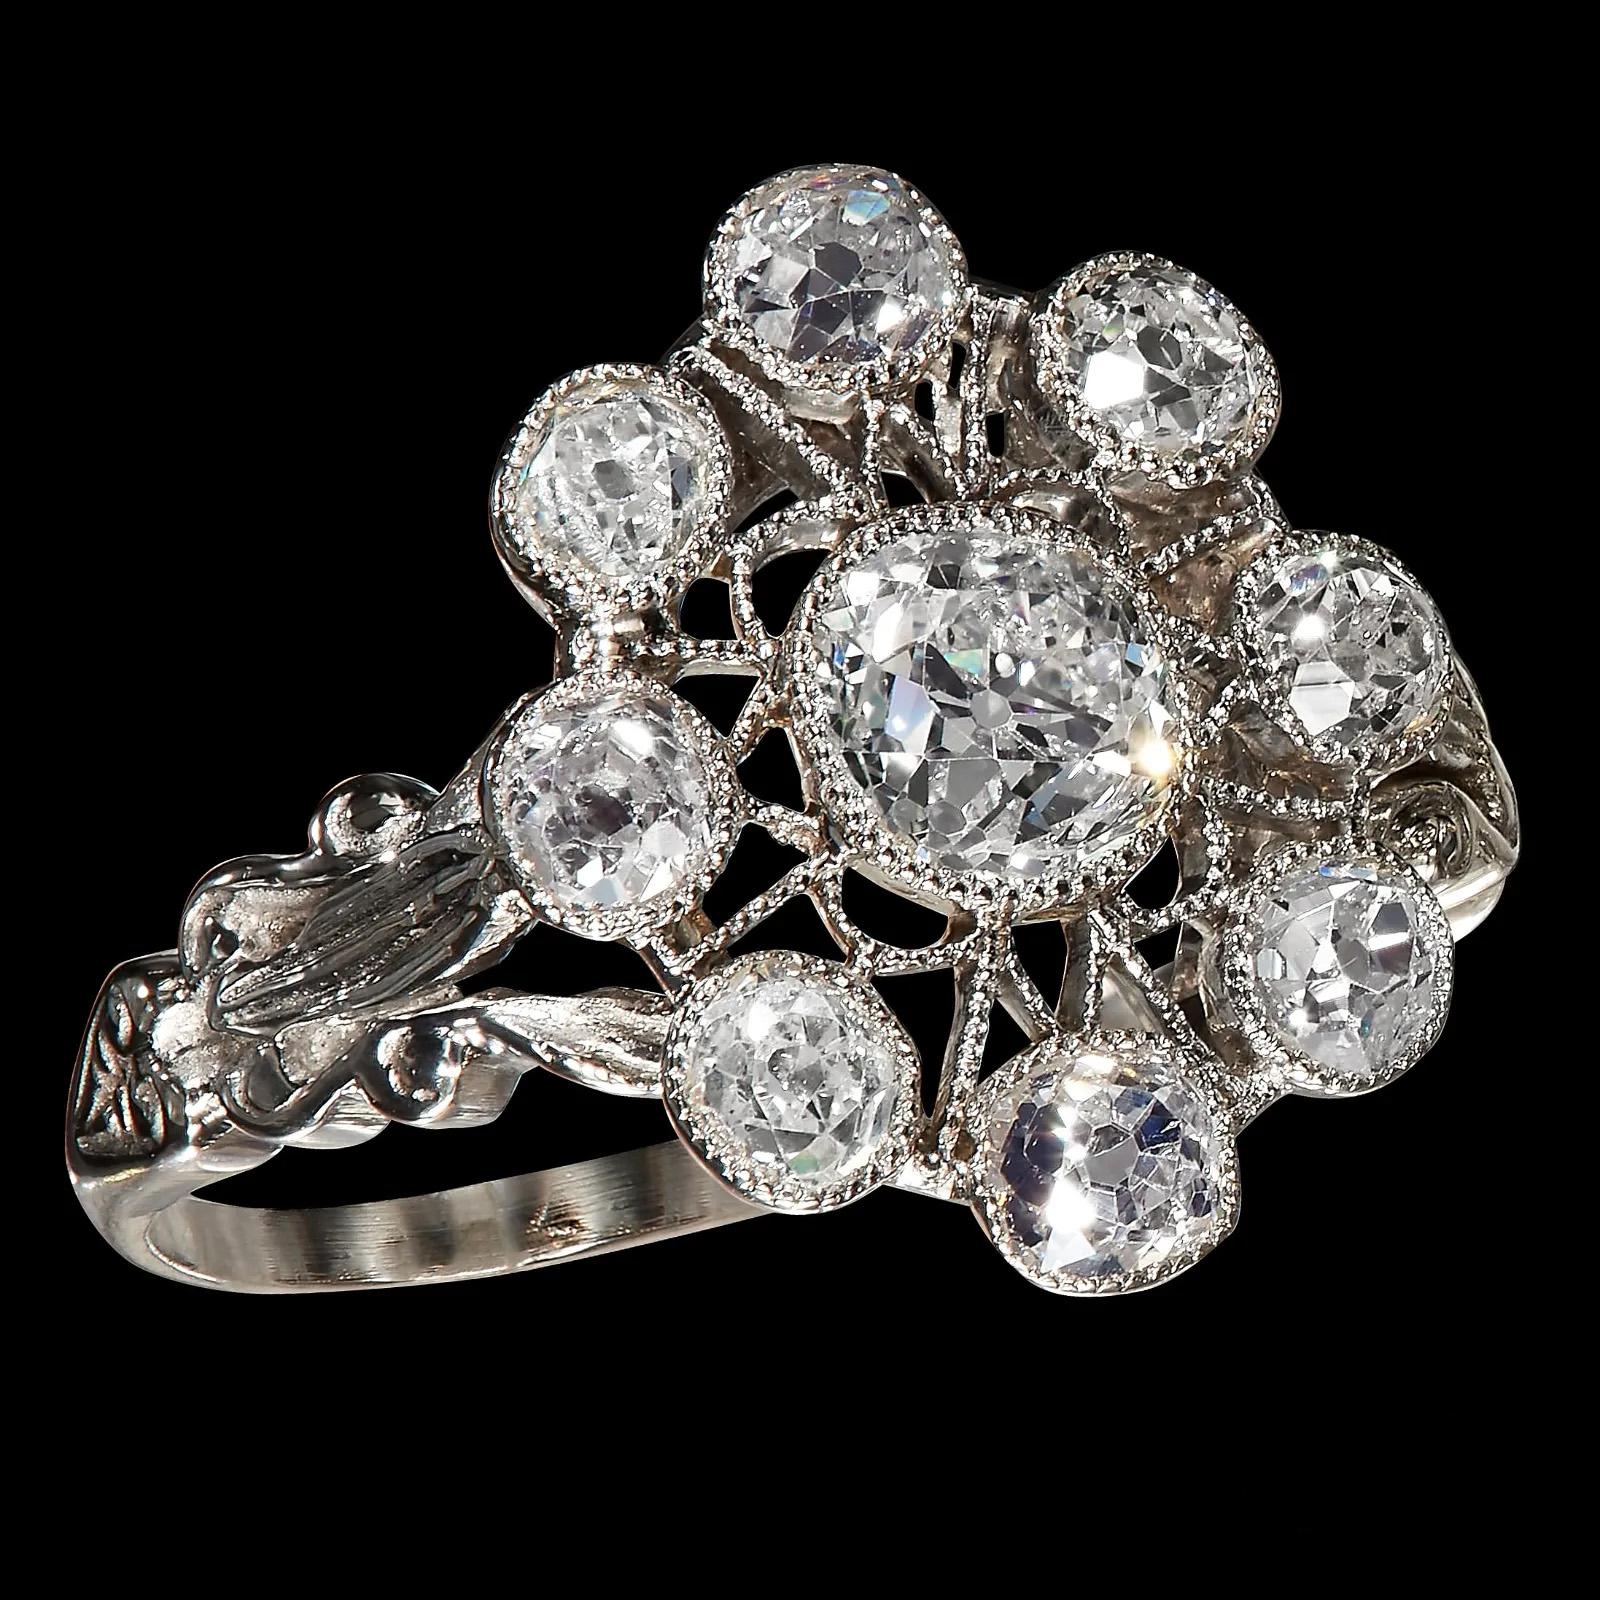 Super Rare and Authentic 1917. This breathtakingly beautiful and shimmering early Art Deco Cluster European-made bright Platinum Ring containing 9 bezel-set OLD EUROPEAN cut Diamonds with a total weight of approximately 1.65cts. 
Before the diamonds